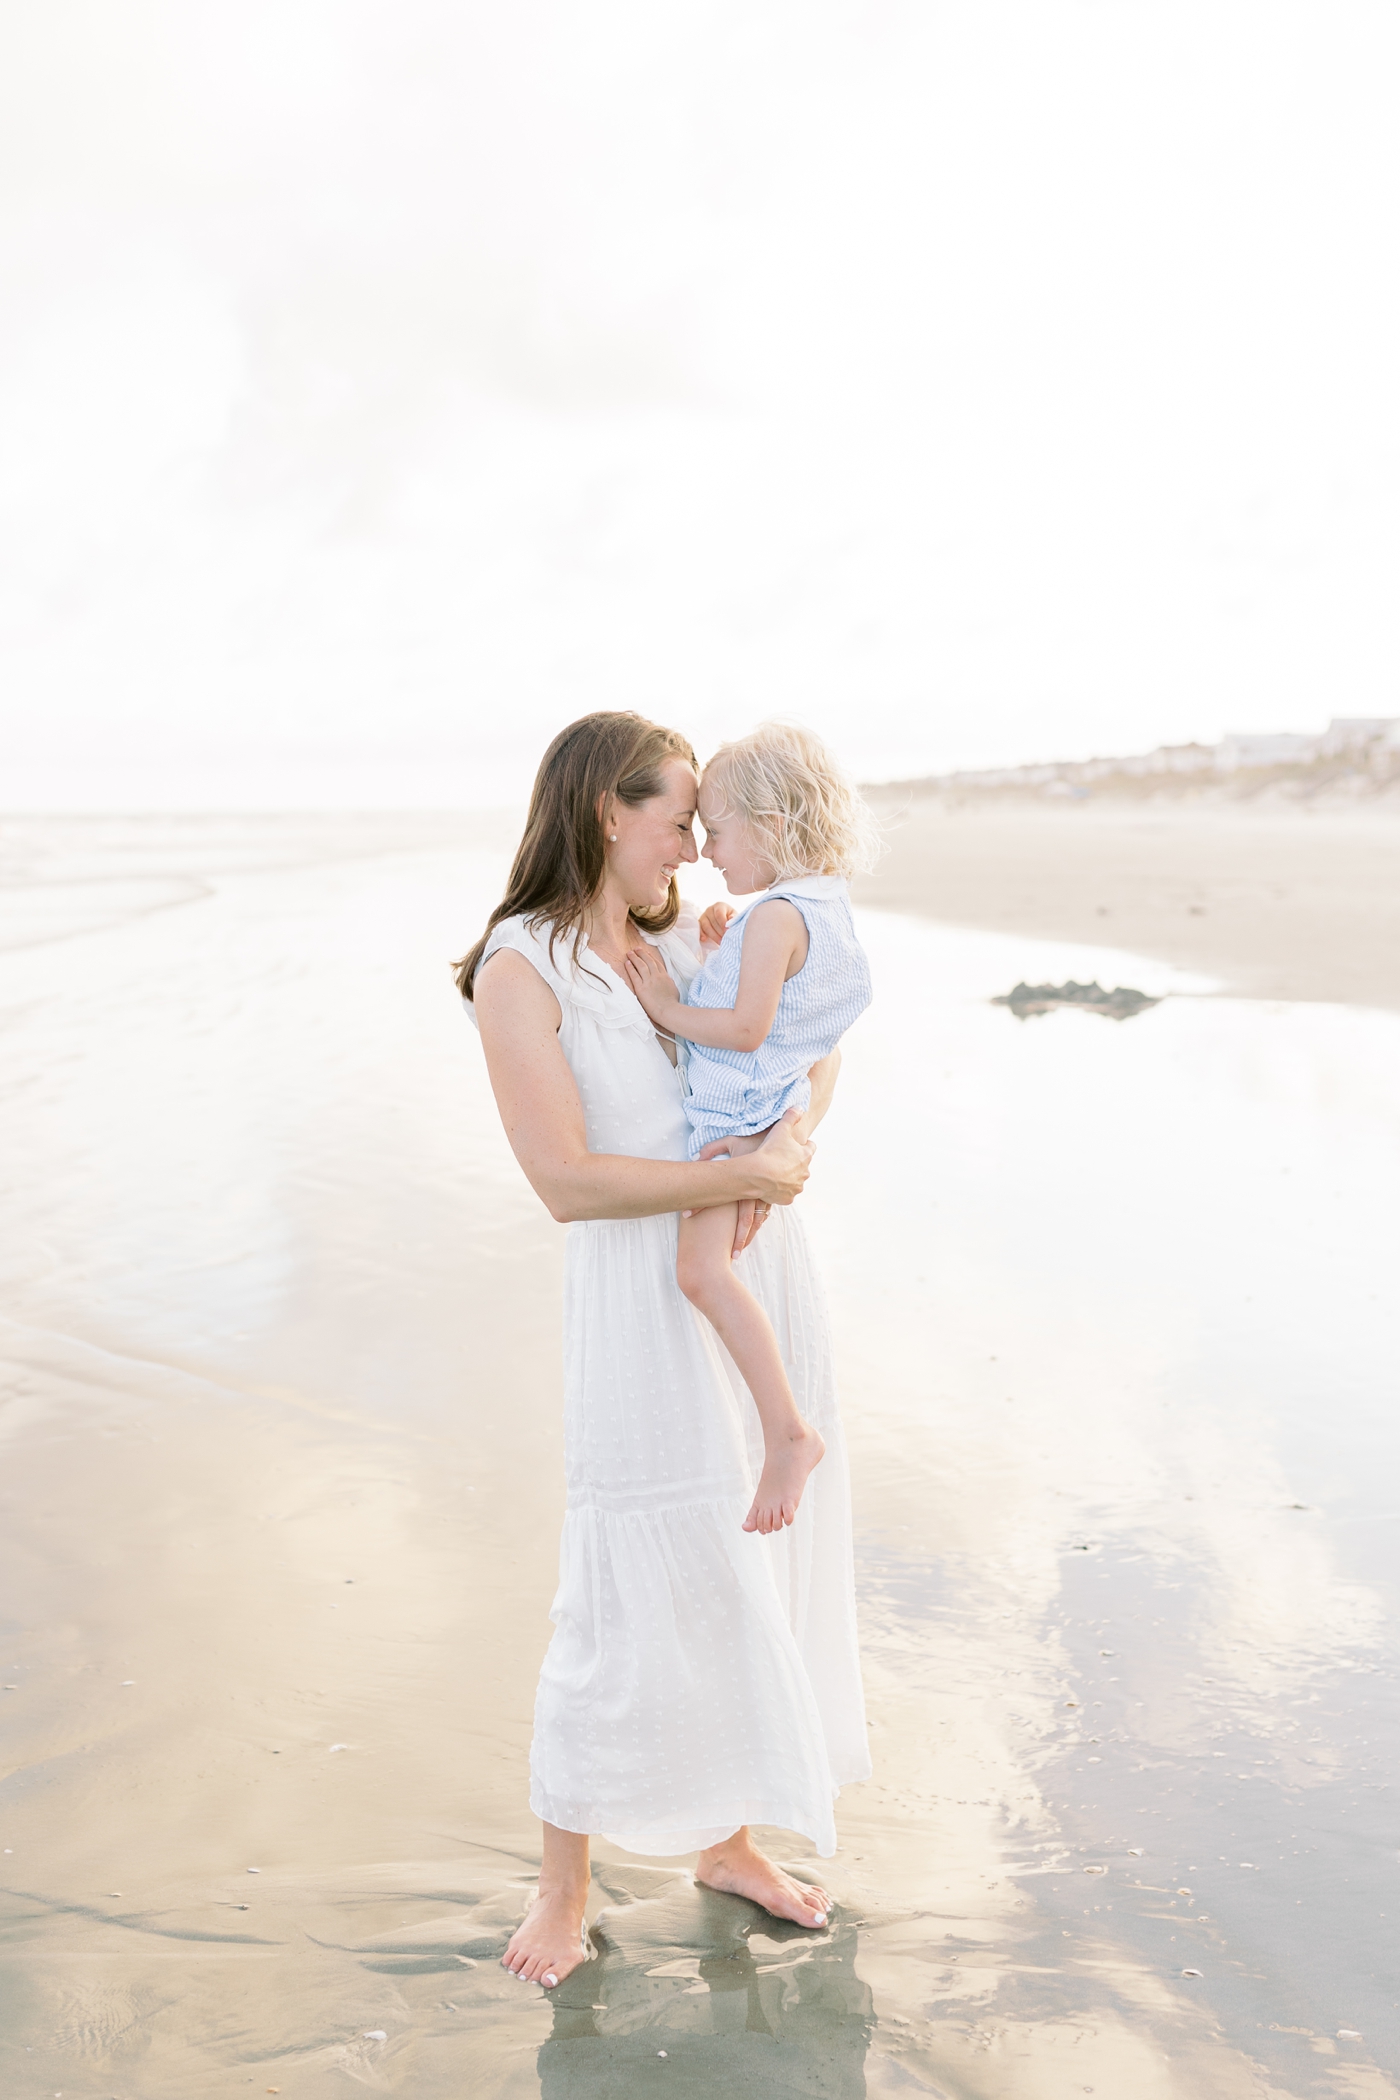 Mom snuggling with daughter on the beach | Photo by Caitlyn Motycka Photography.